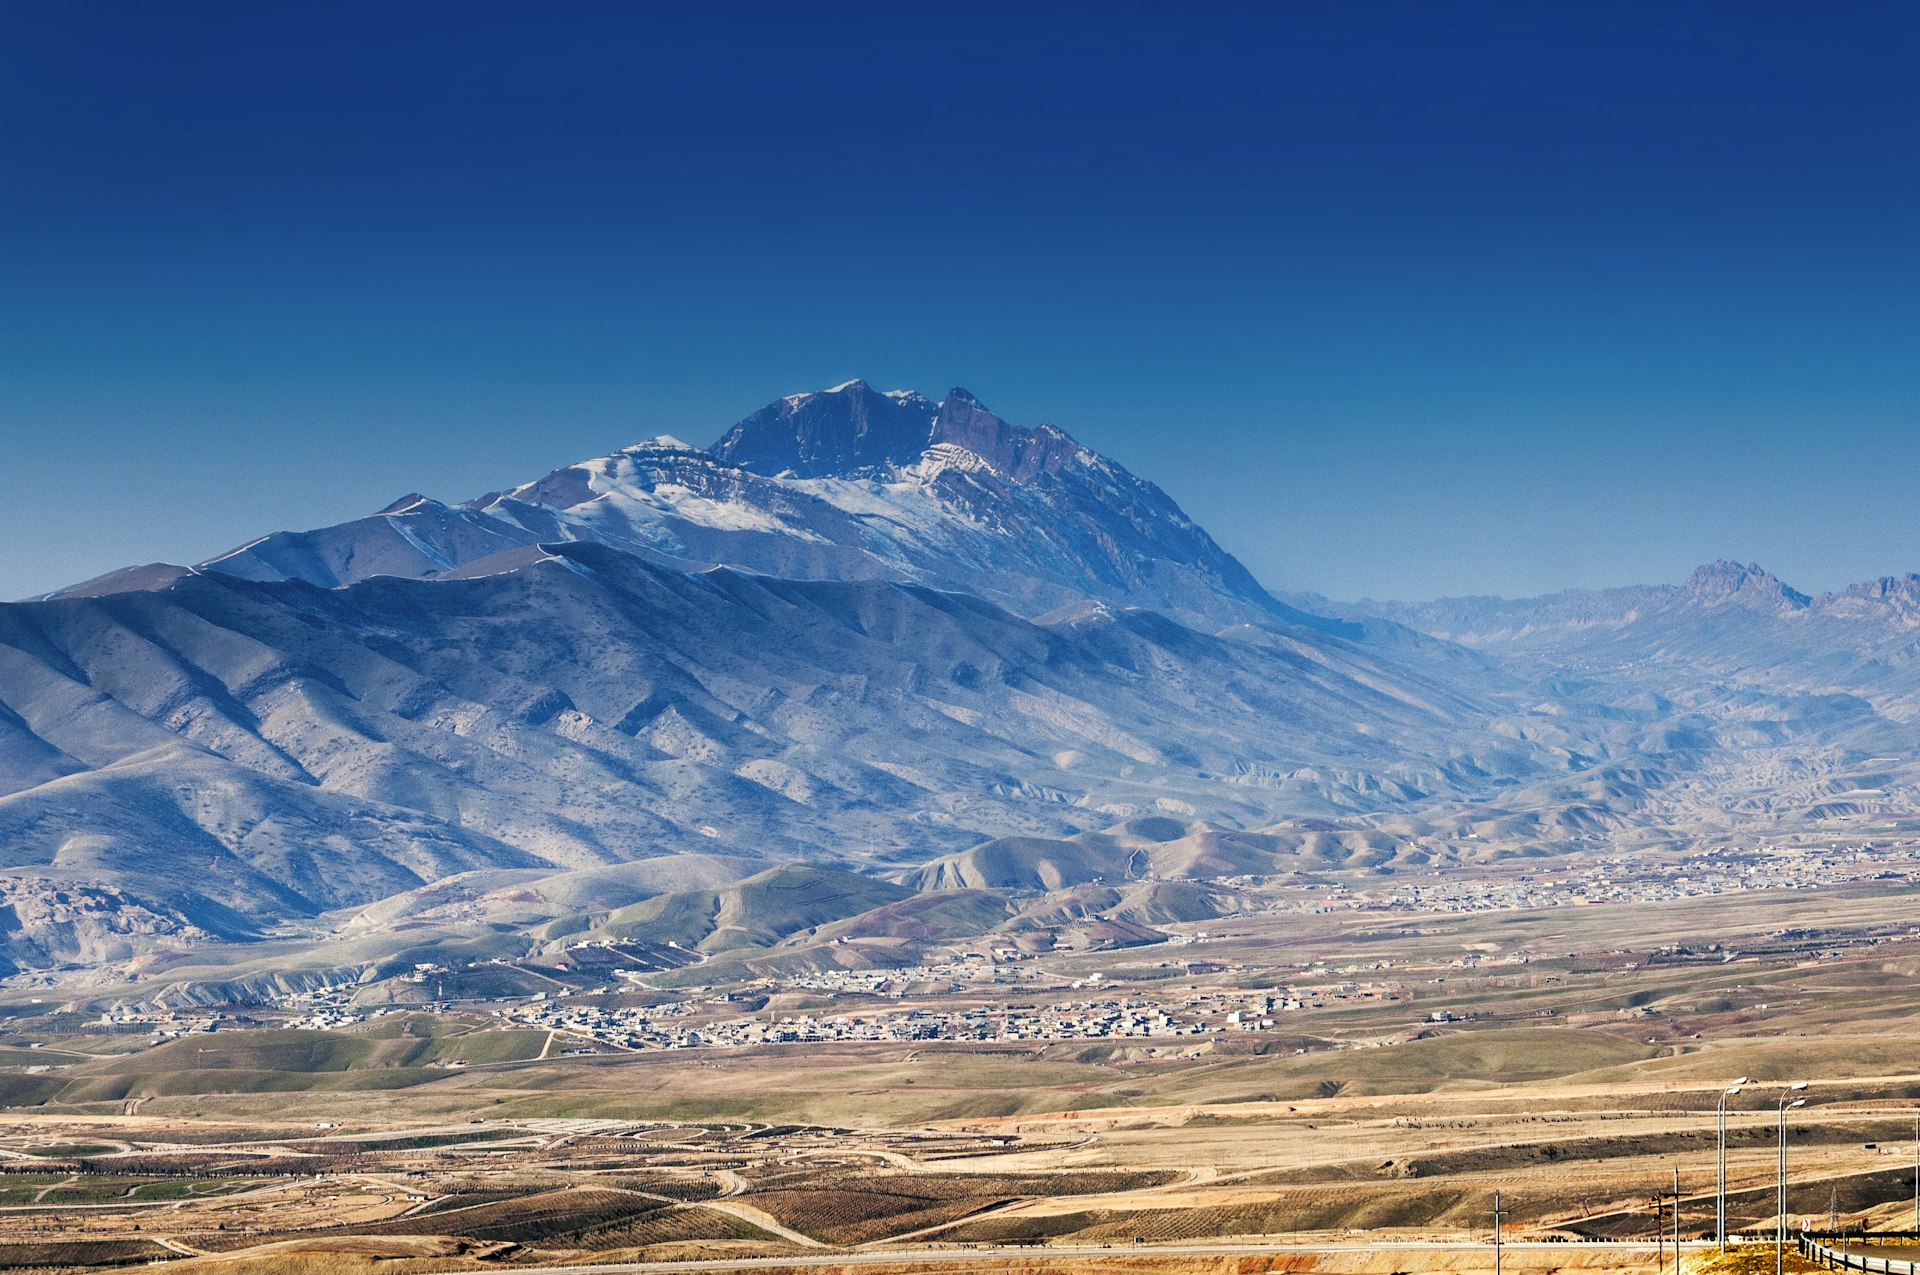 A huge mountain rises above a tiny village in the foothills: Zagros Mountains